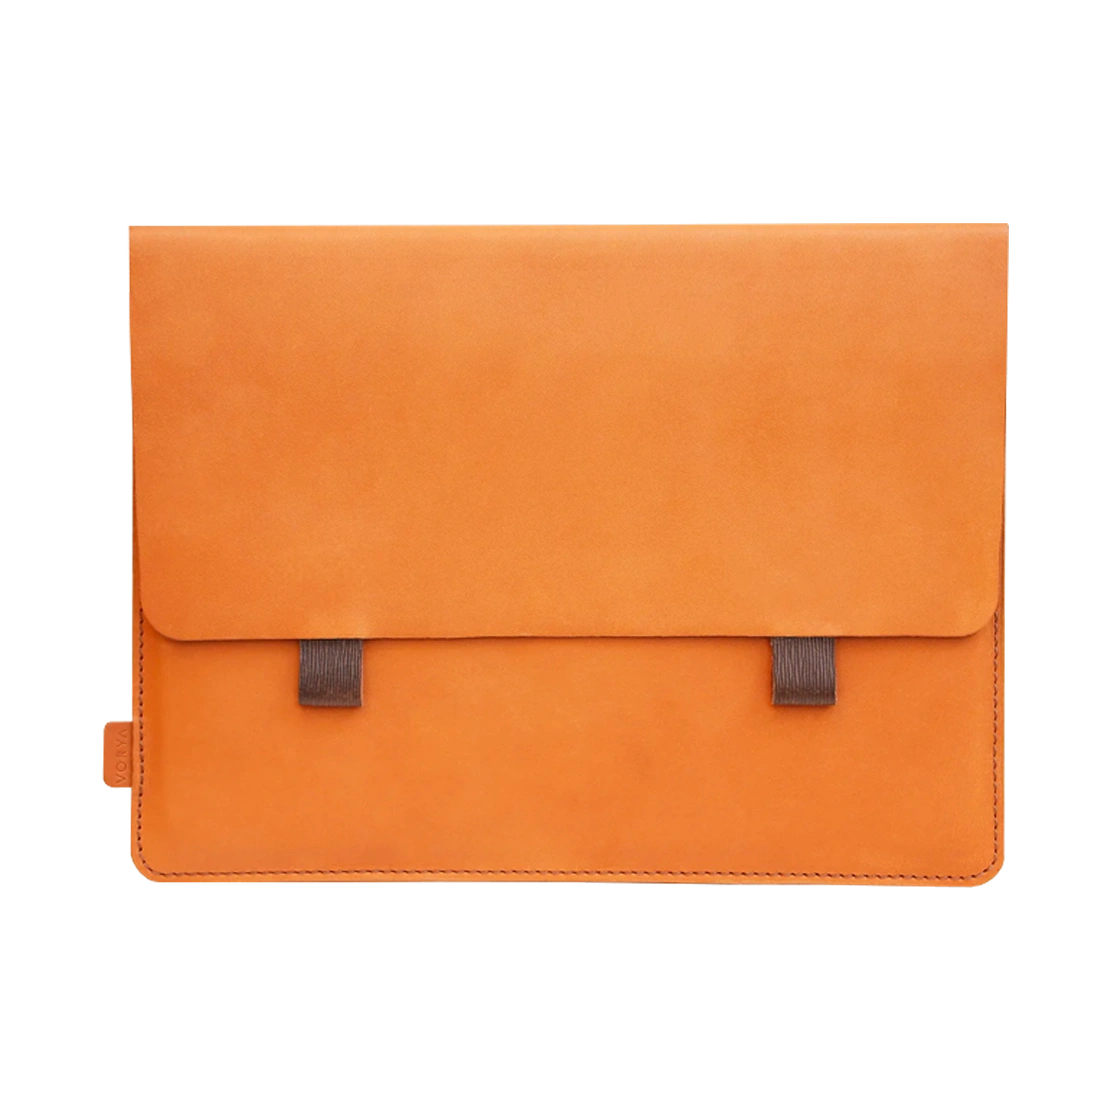 vorya-leather-pouch-cover-for-ipad-mini-8-inch